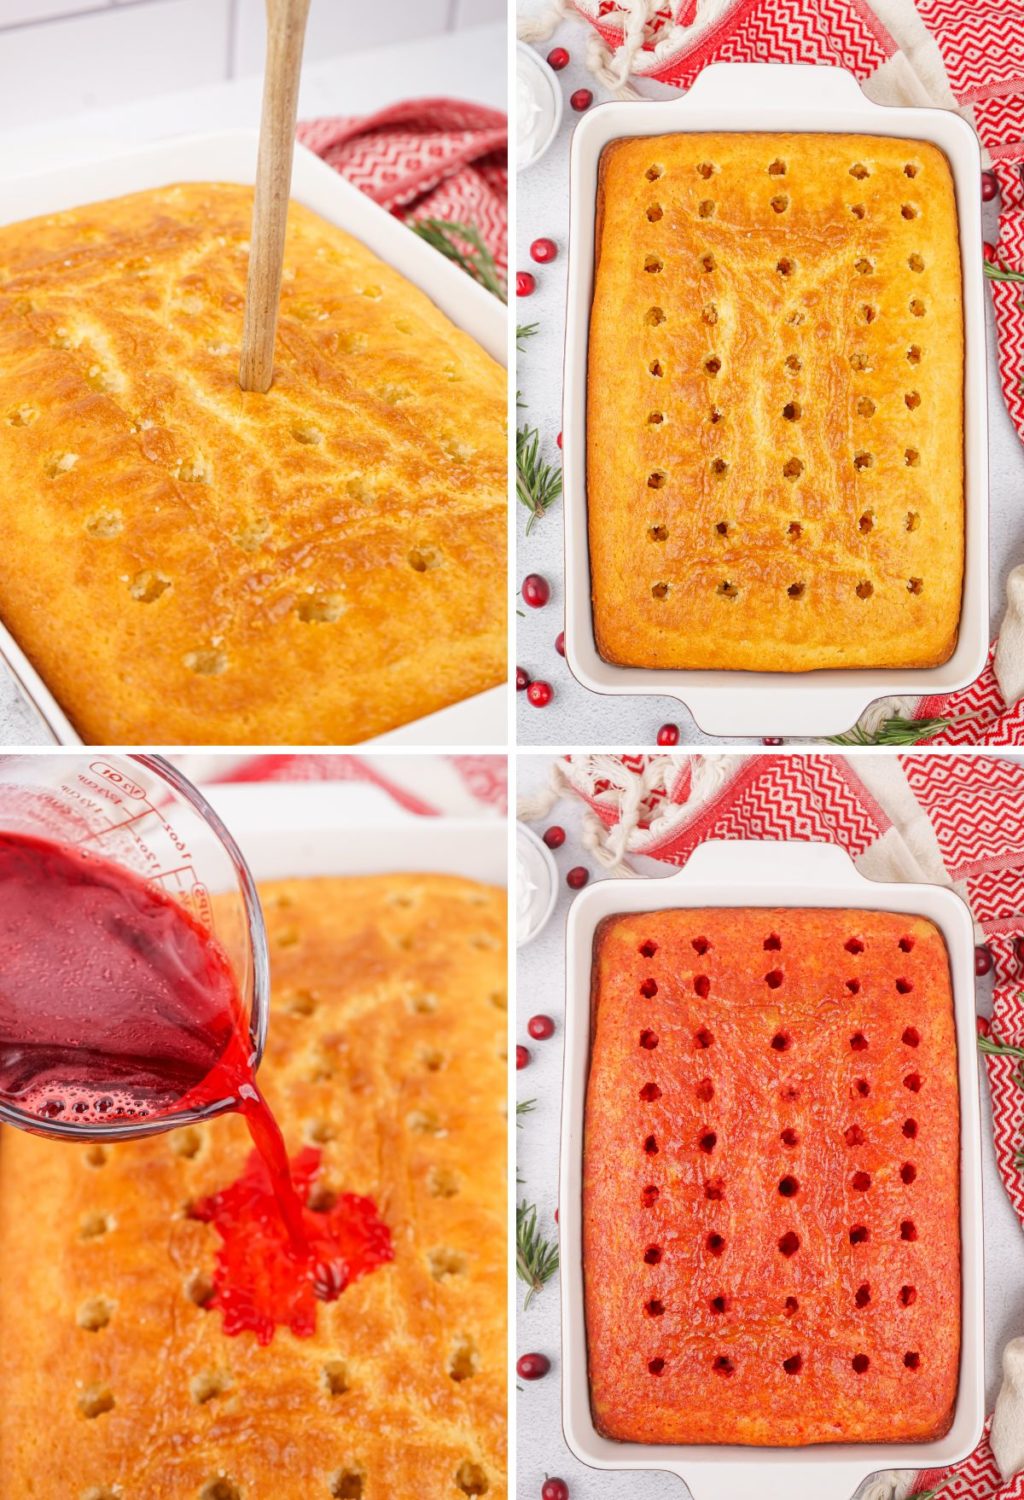 A collage of photos showing how to make a cranberry cake.